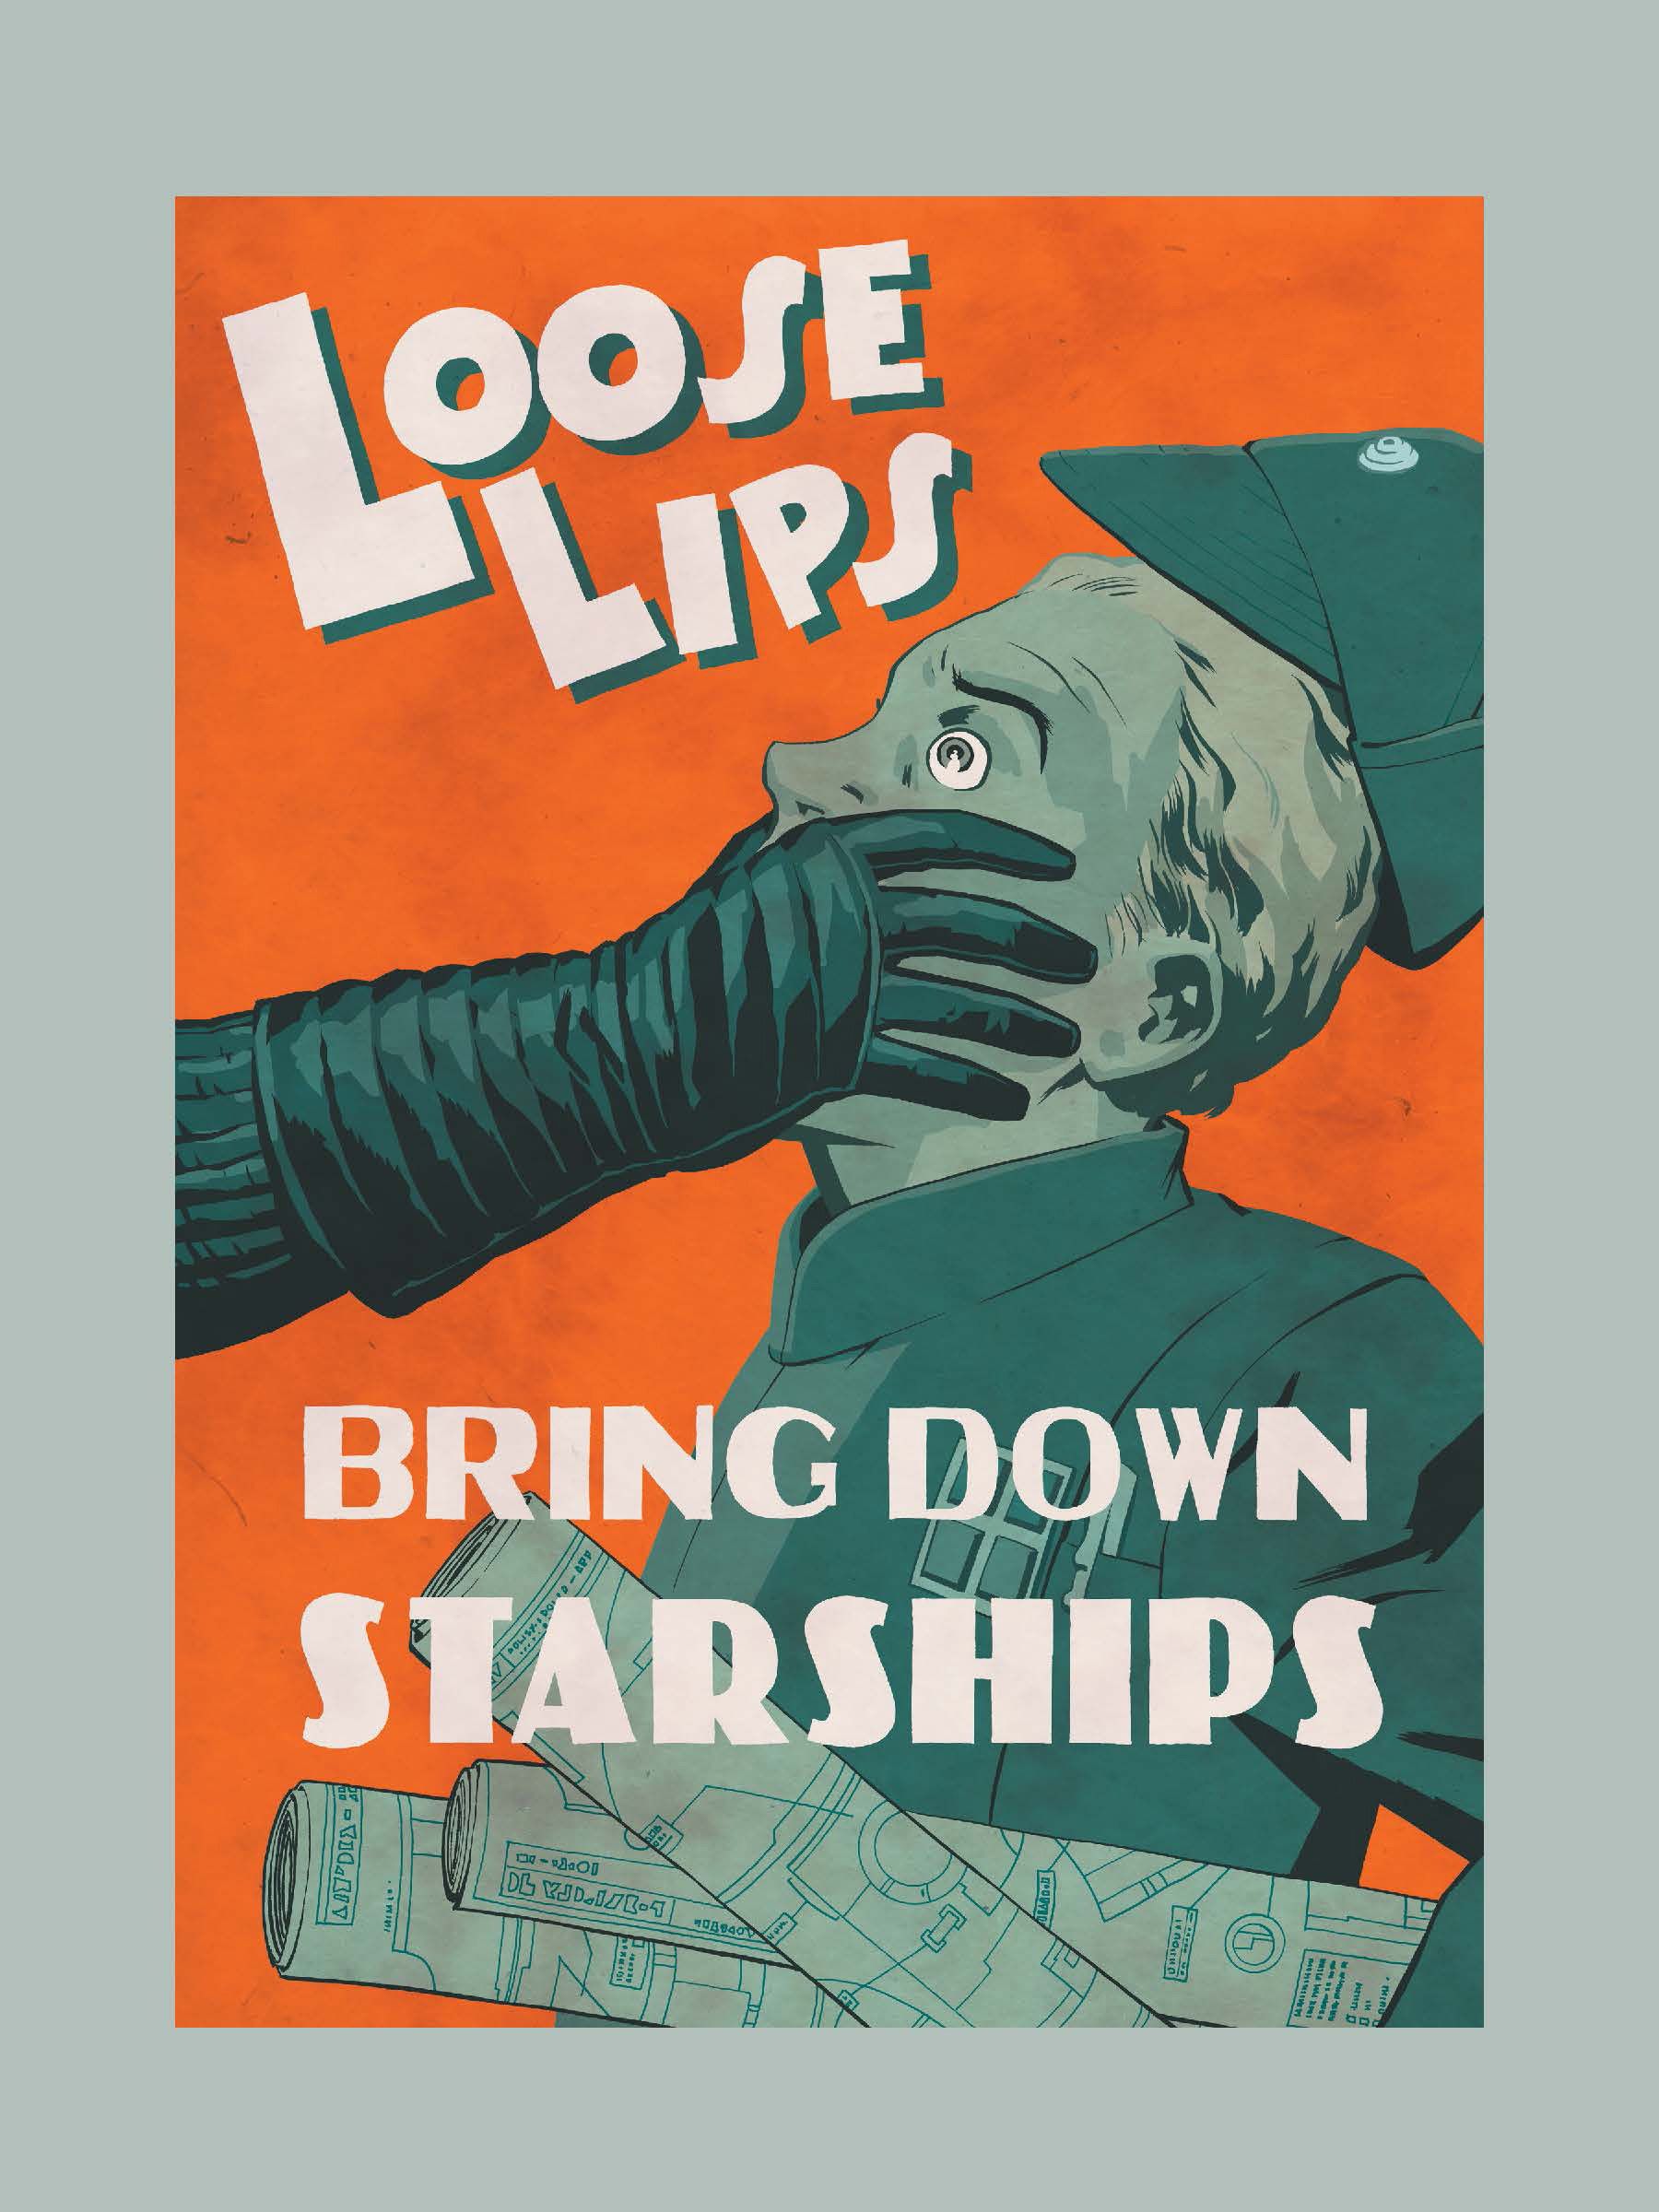 The Book Is Out Oct Wars Propaganda Posters